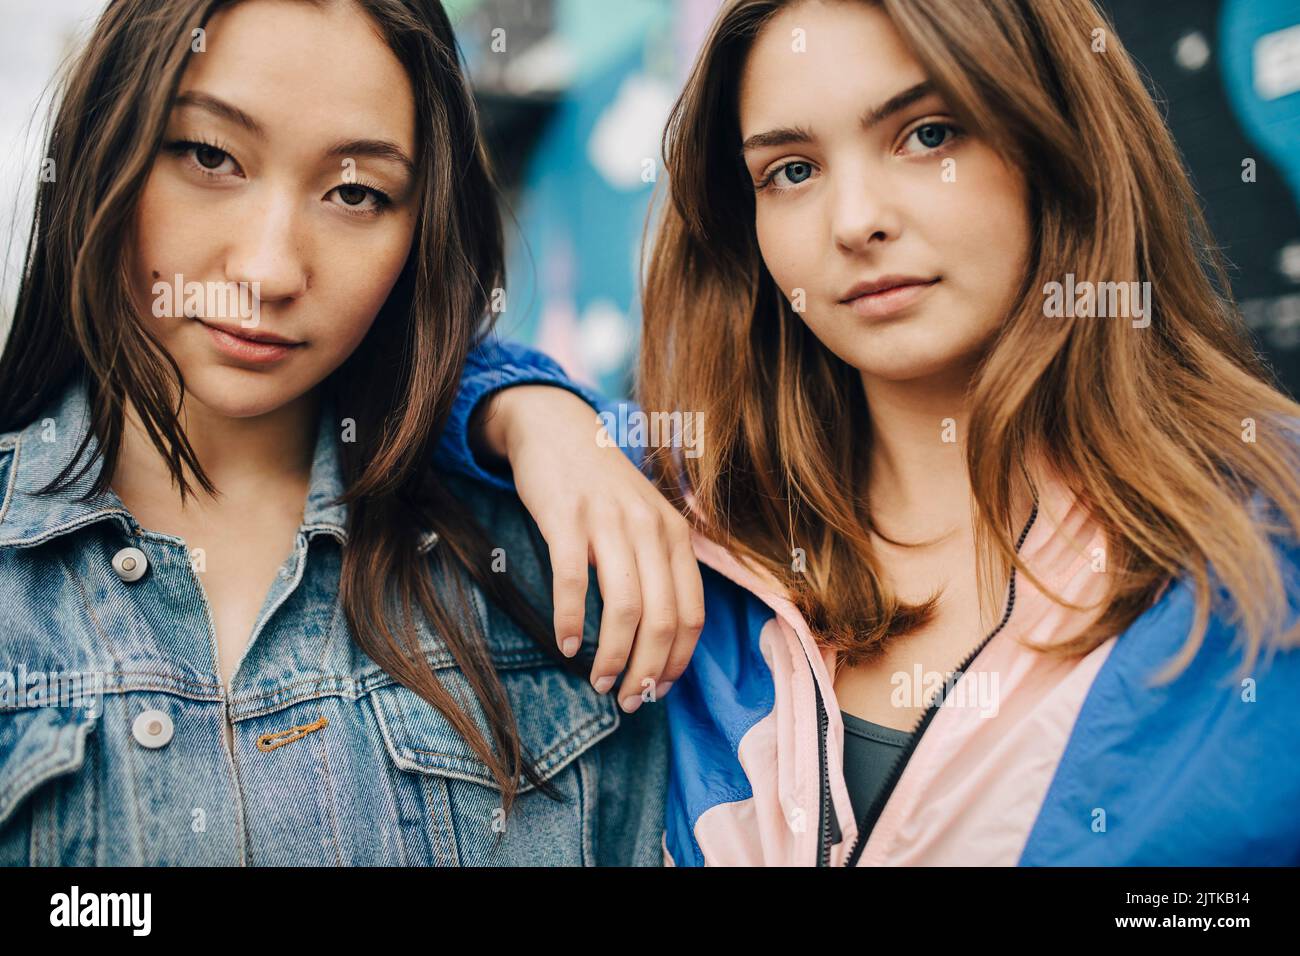 Portrait of confident young woman with hand on shoulder of female friend Stock Photo